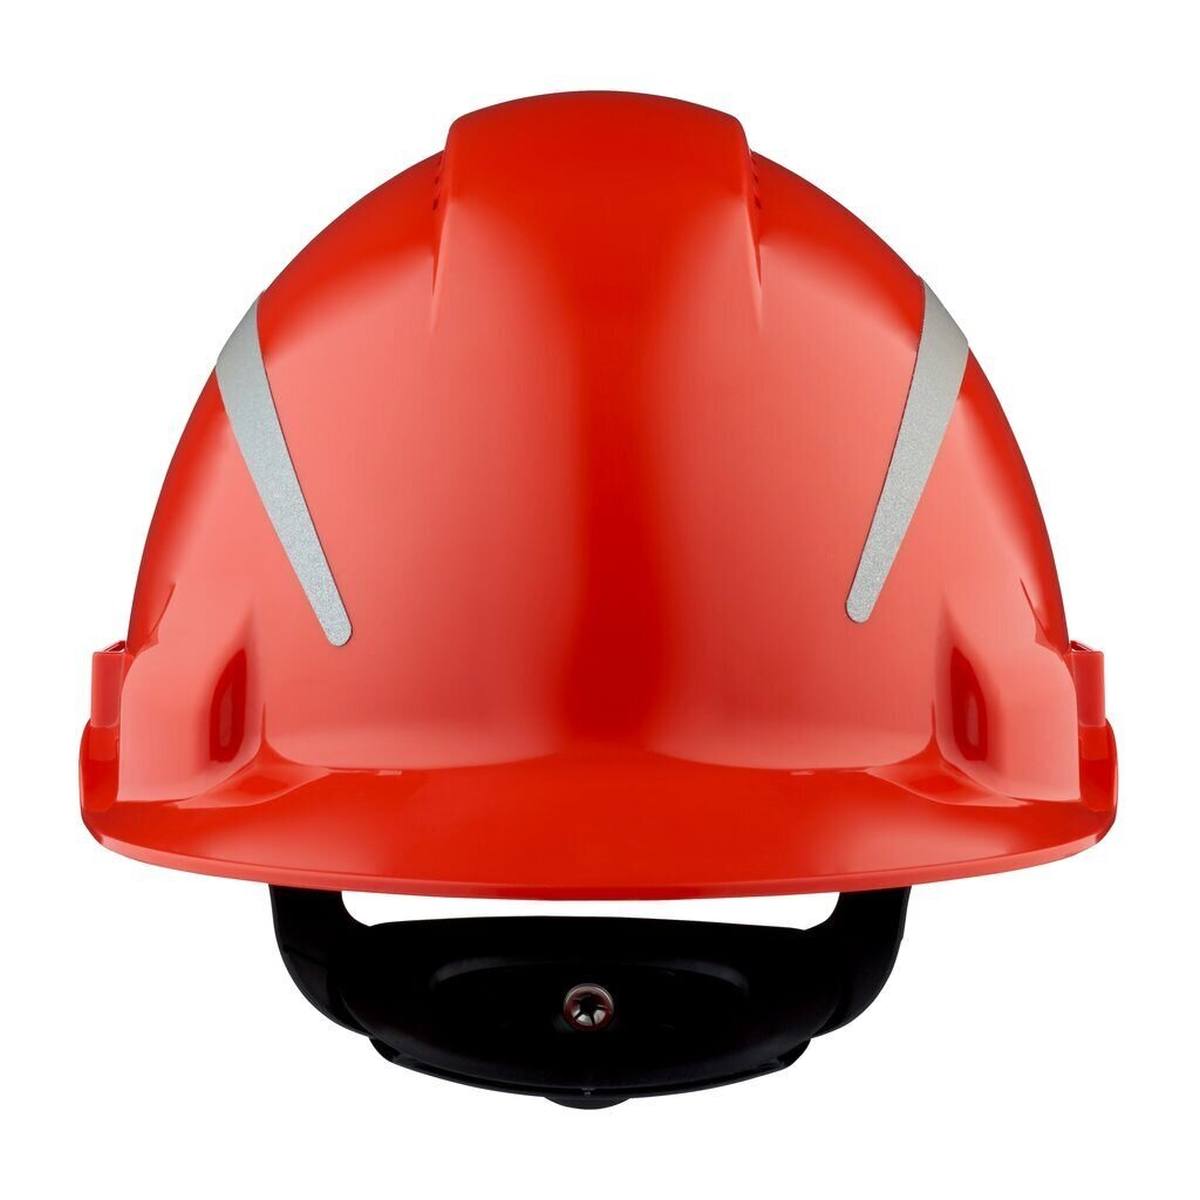 3M G3000 safety helmet with UV indicator, red, ABS, ventilated ratchet fastener, plastic sweatband, reflective sticker